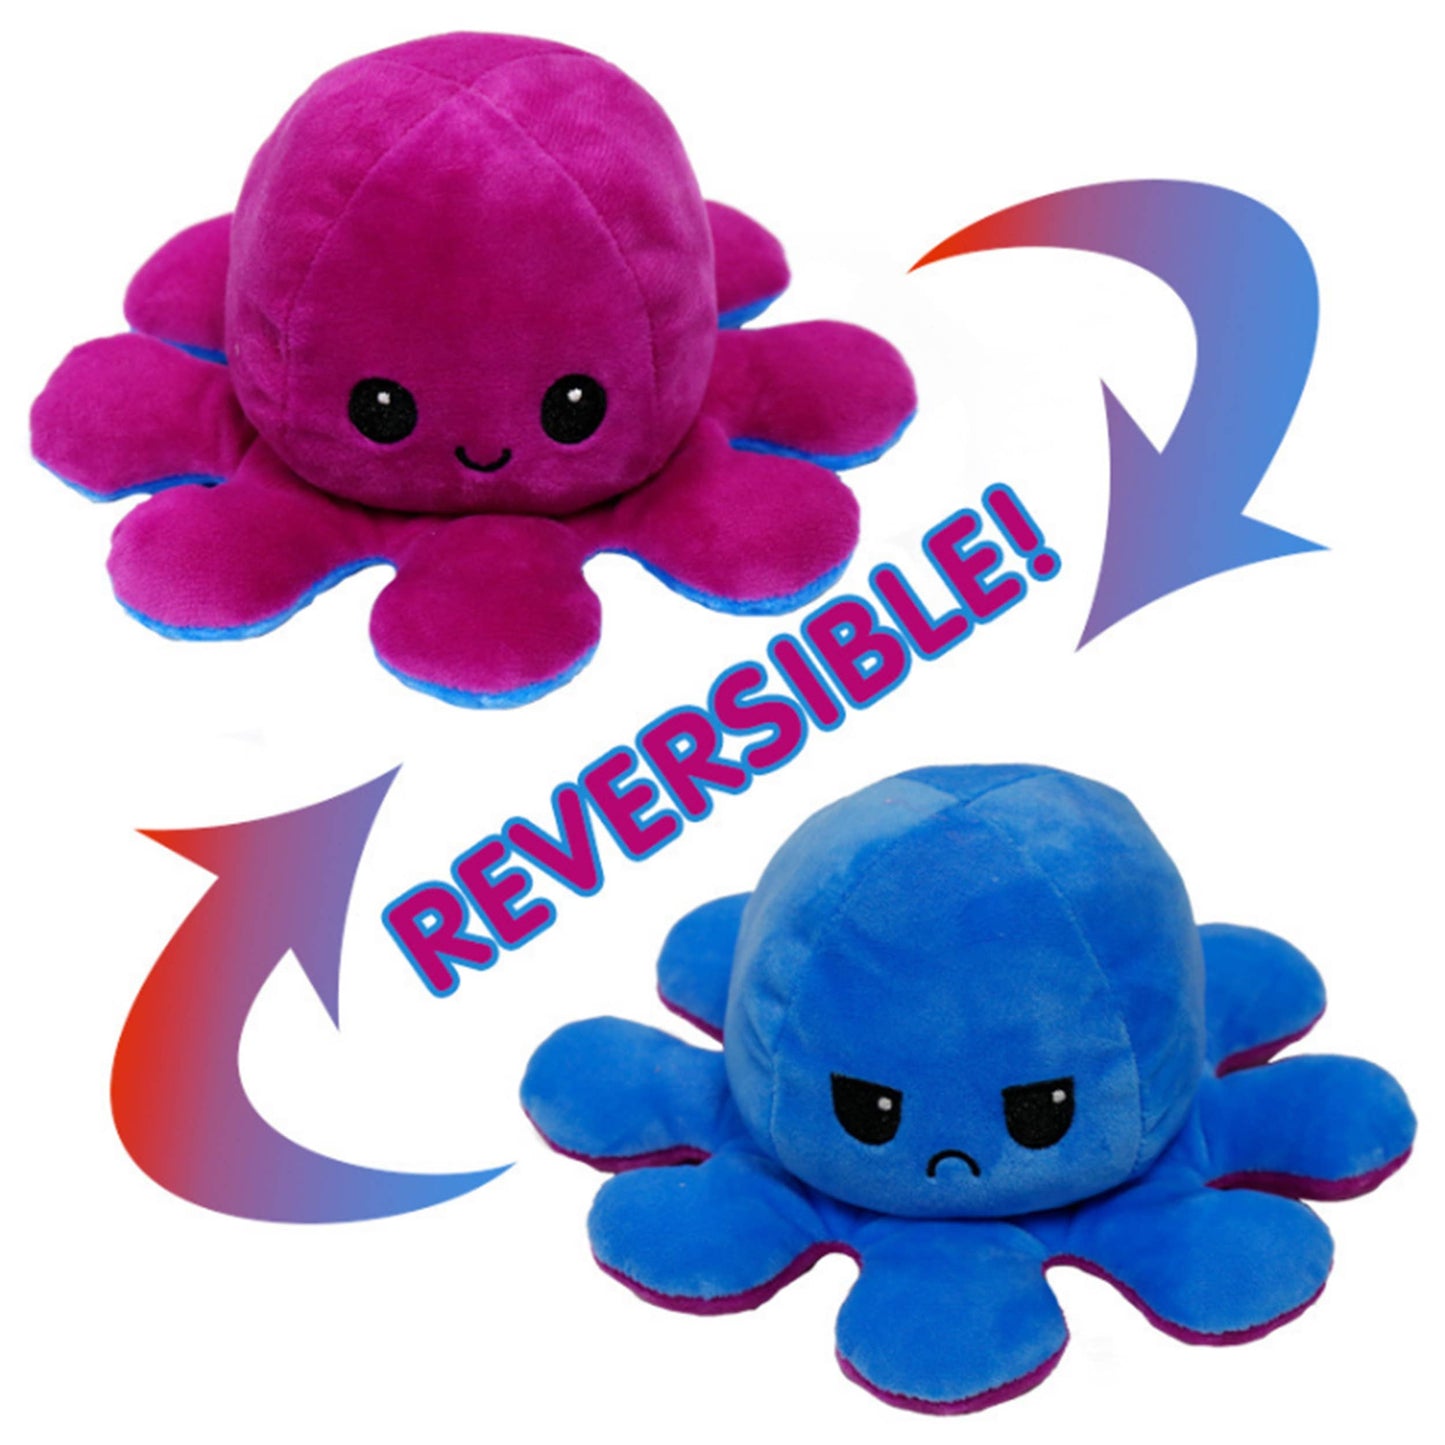 JSBlueRidge Toys - Reversible Octopus Plush: The Cute and Fun Toy for Everyone